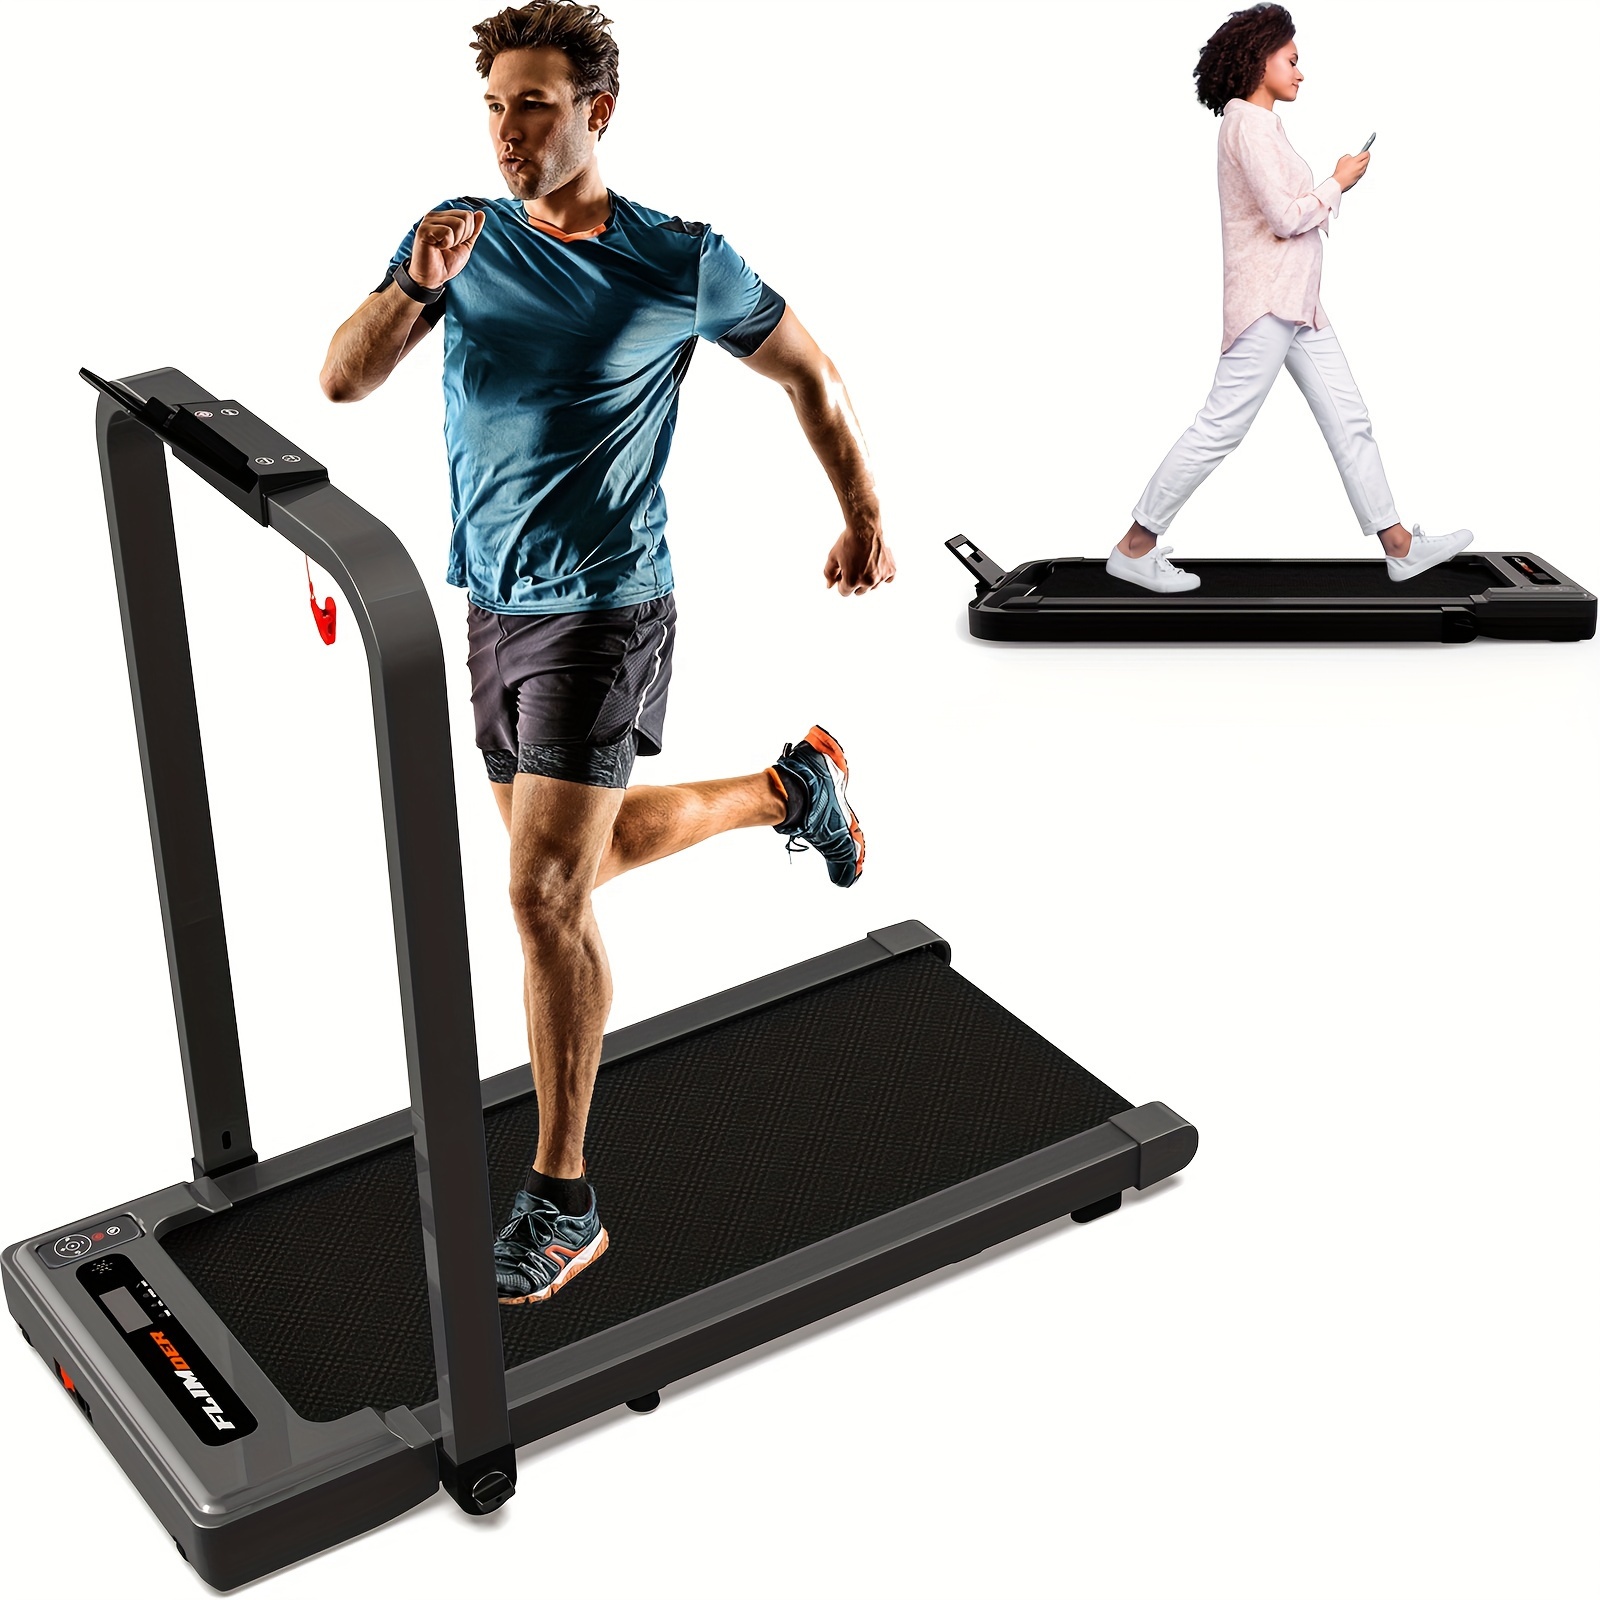 

1pc Foldable Fitness Treadmill, Under Desk Running Machine For Home Office, Suitable For Running, Fitness, Body Shaping